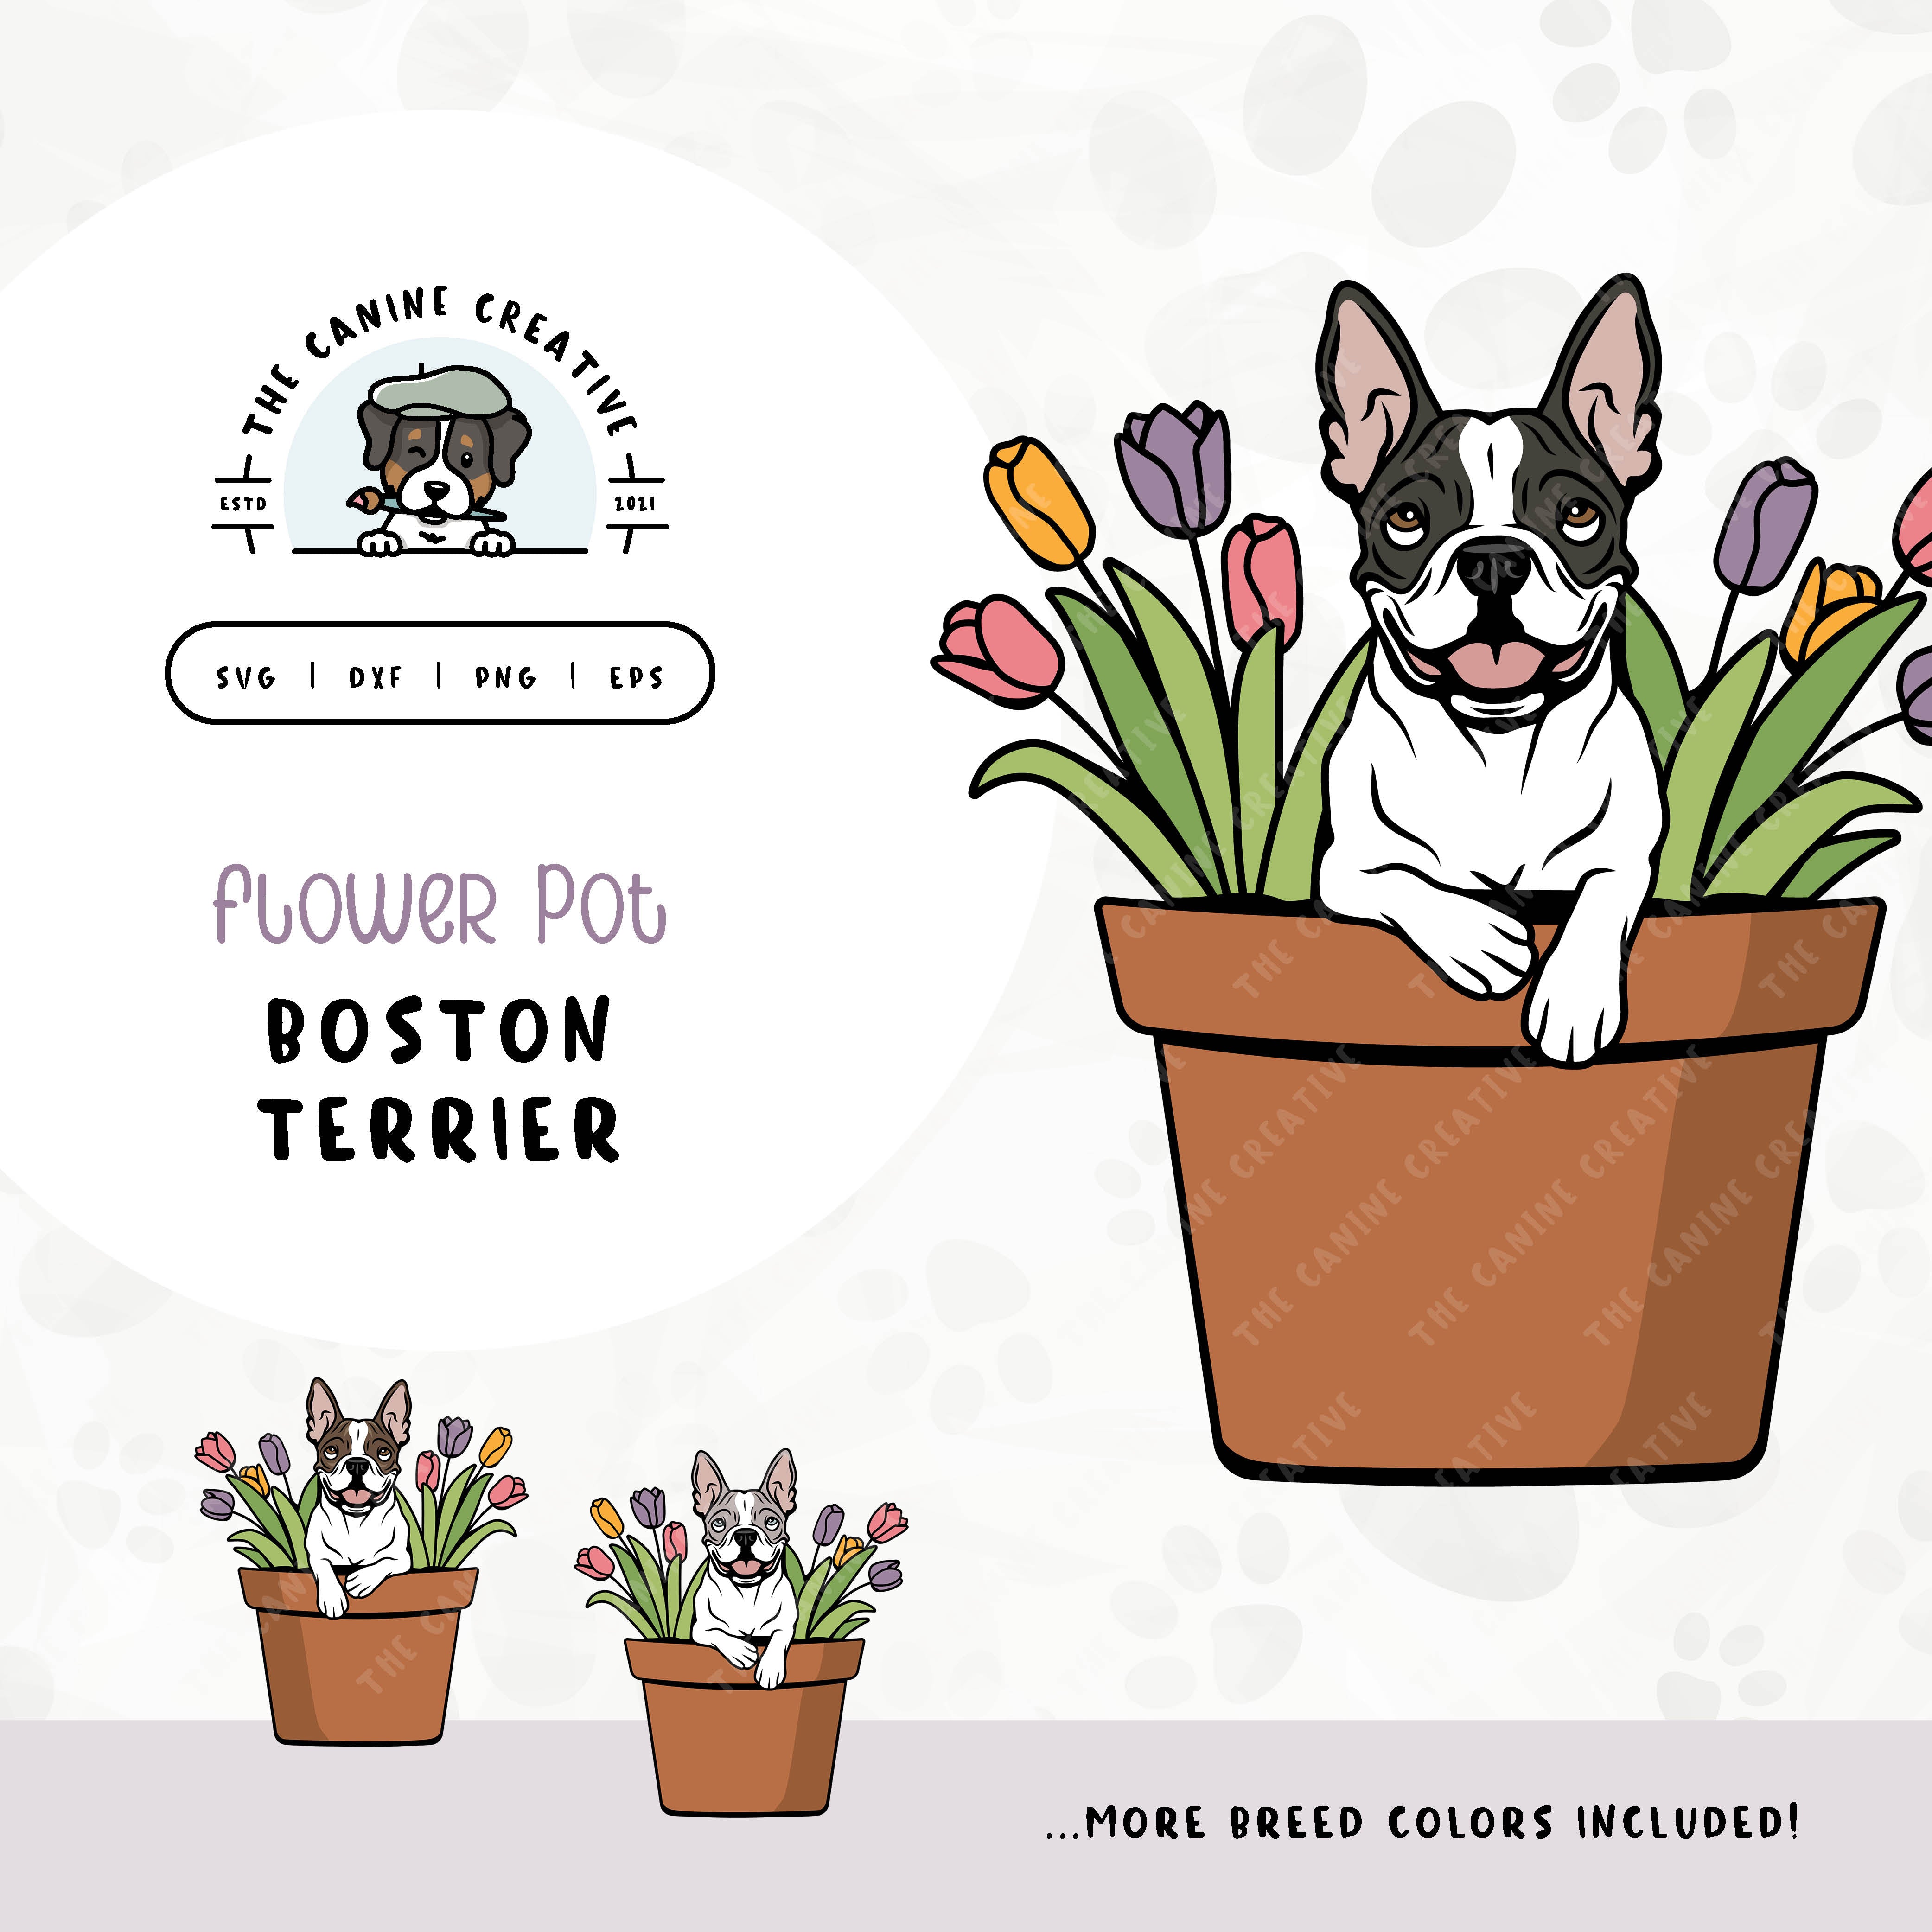 This springtime illustration features a Boston Terrier peeking out of a pot of vibrant tulips. File formats include: SVG, DXF, PNG, and EPS.